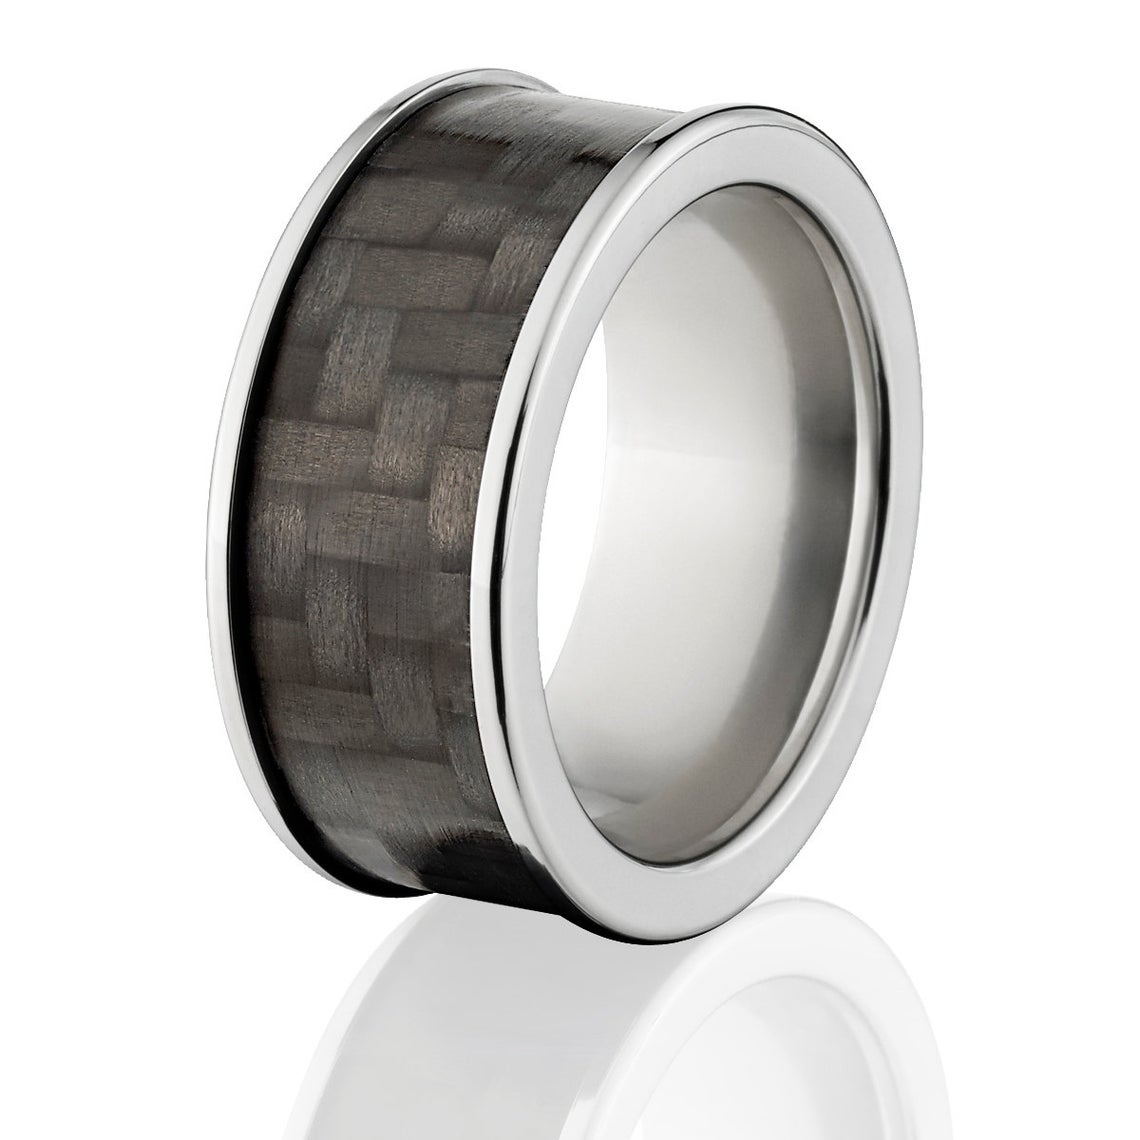 9mm wide black carbon fiber wedding band with titanium edges and a flat profile